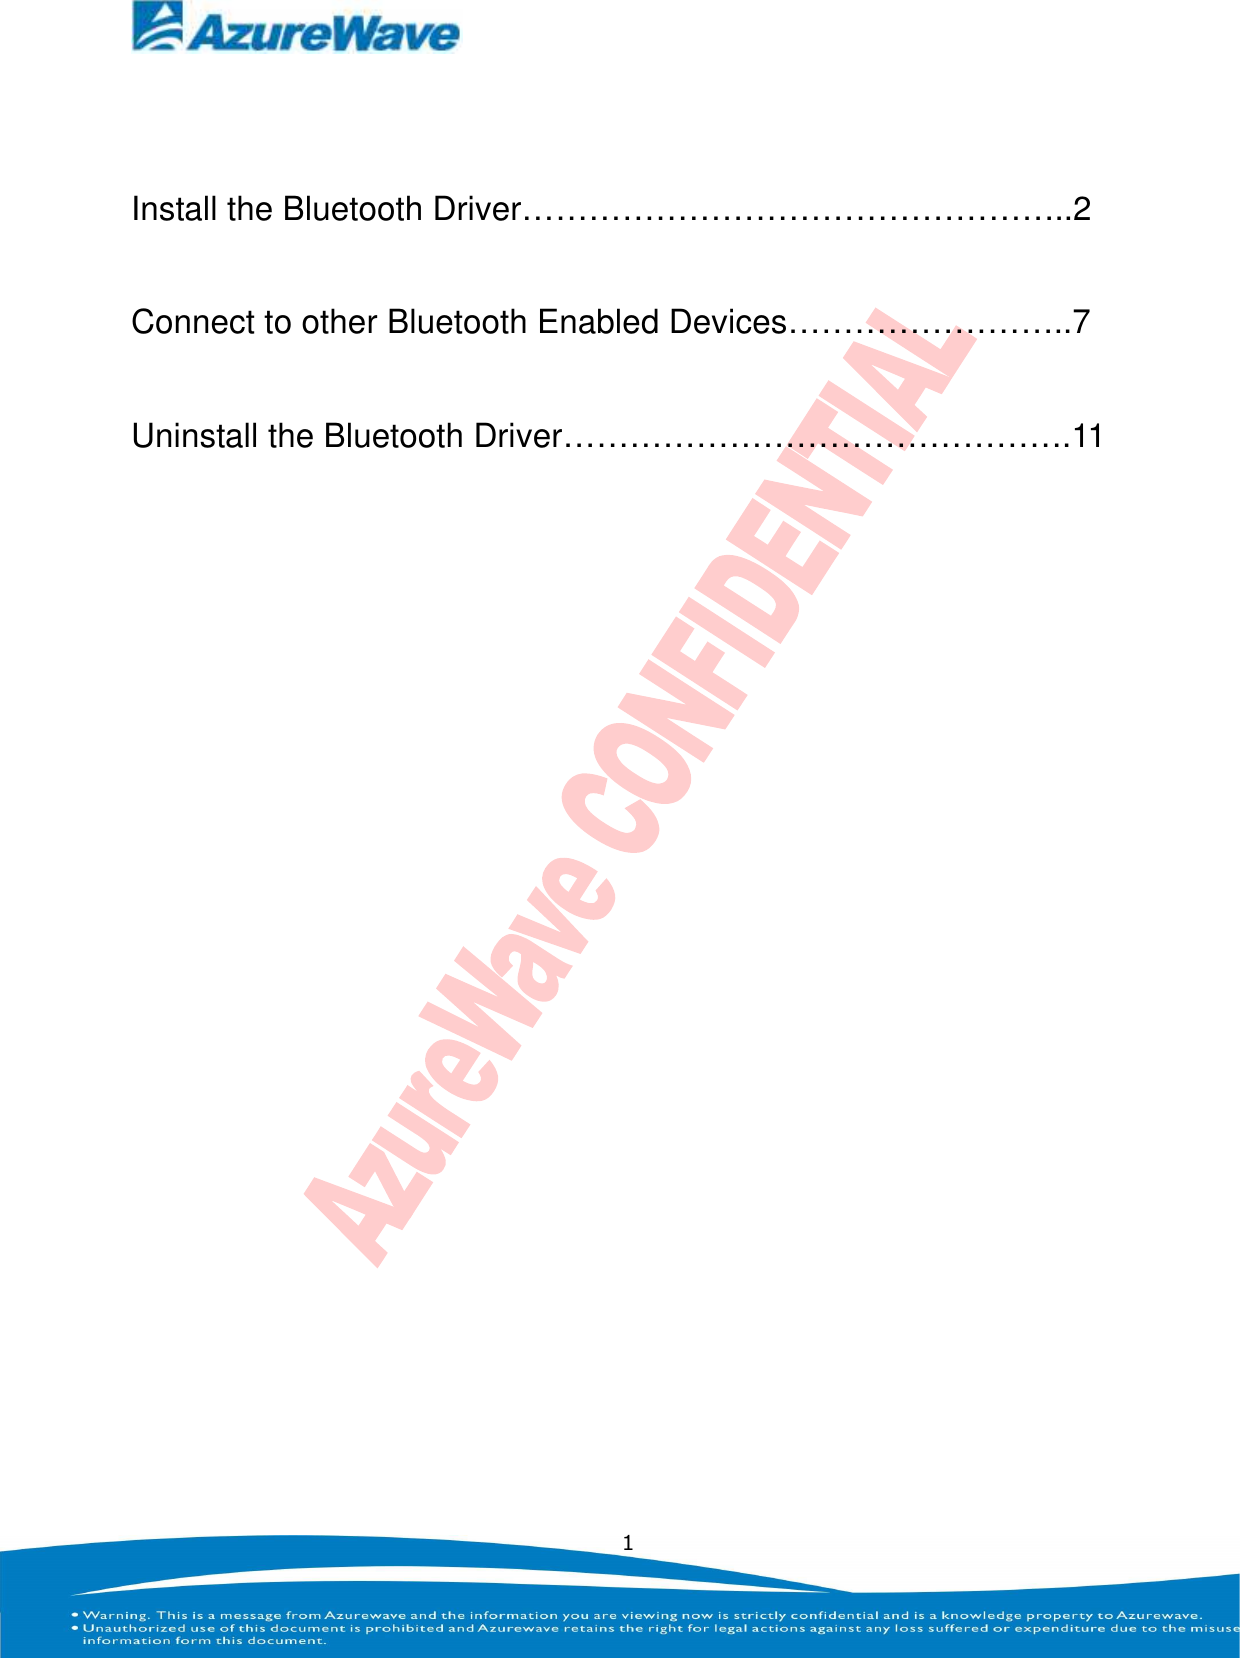    1  Install the Bluetooth Driver…………………………………………..2 Connect to other Bluetooth Enabled Devices……………………..7 Uninstall the Bluetooth Driver……………………………………….11          